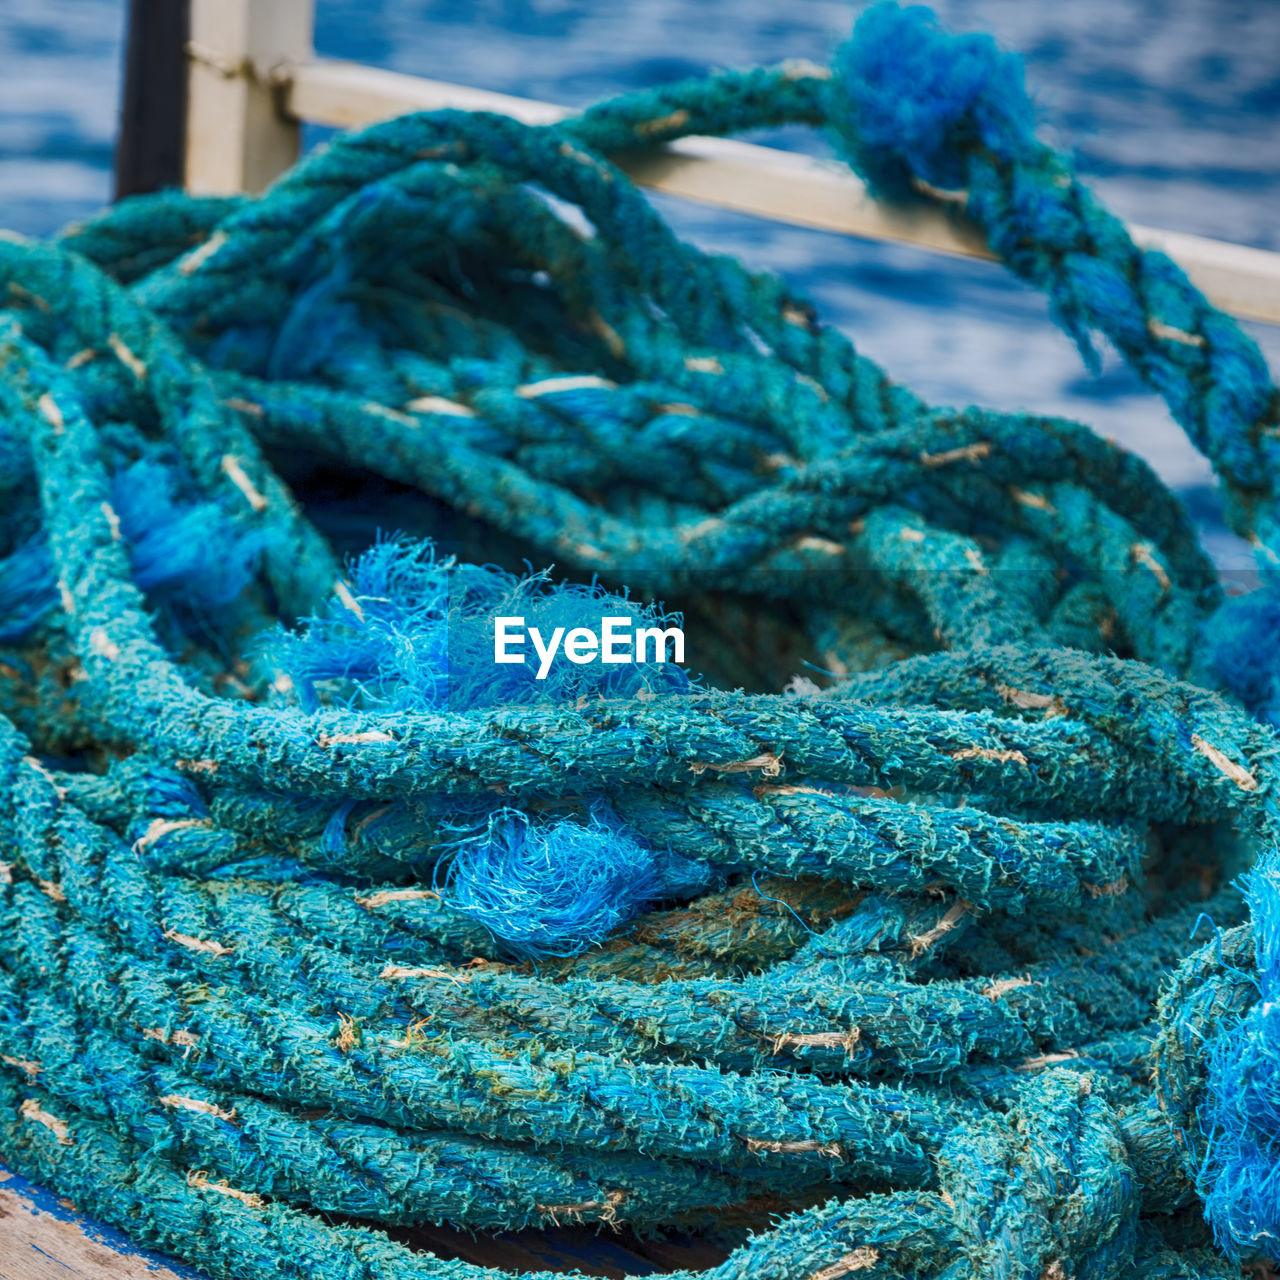 CLOSE-UP OF ROPE TIED UP ON BLUE FISHING